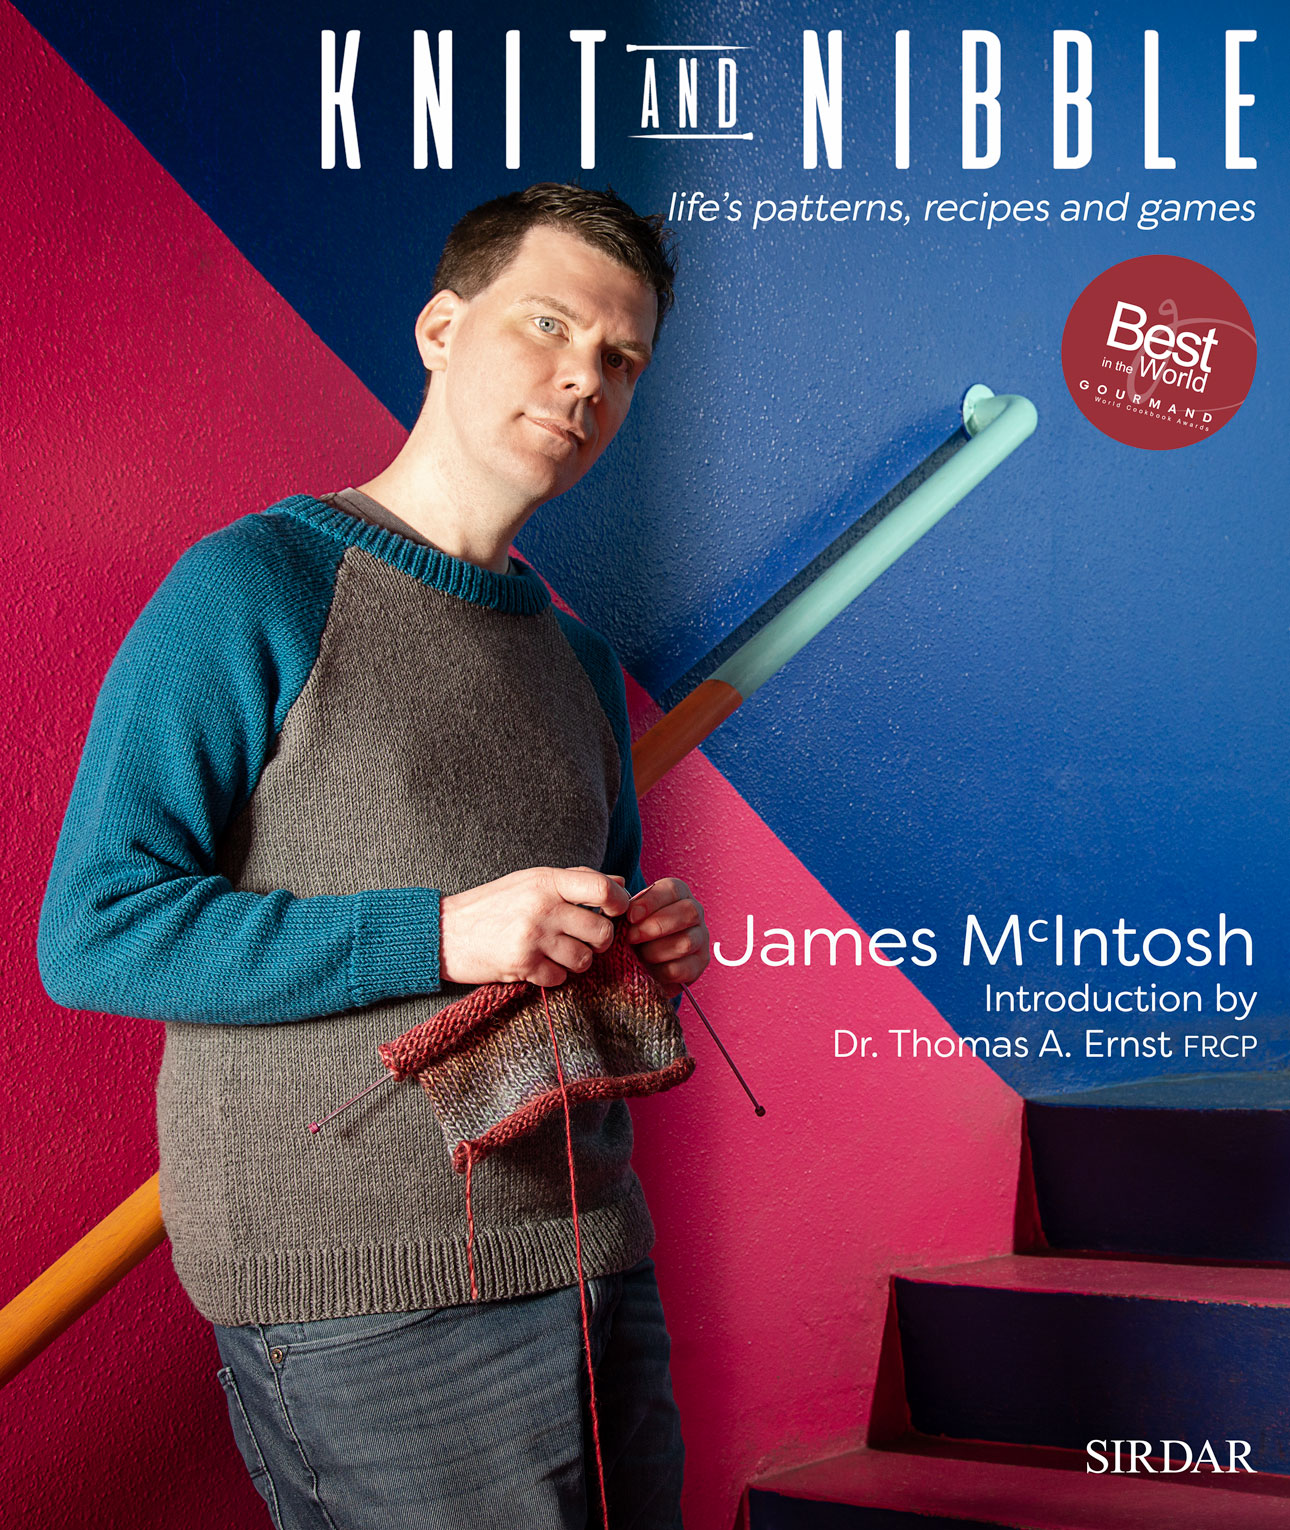 Books for men who knit or want to